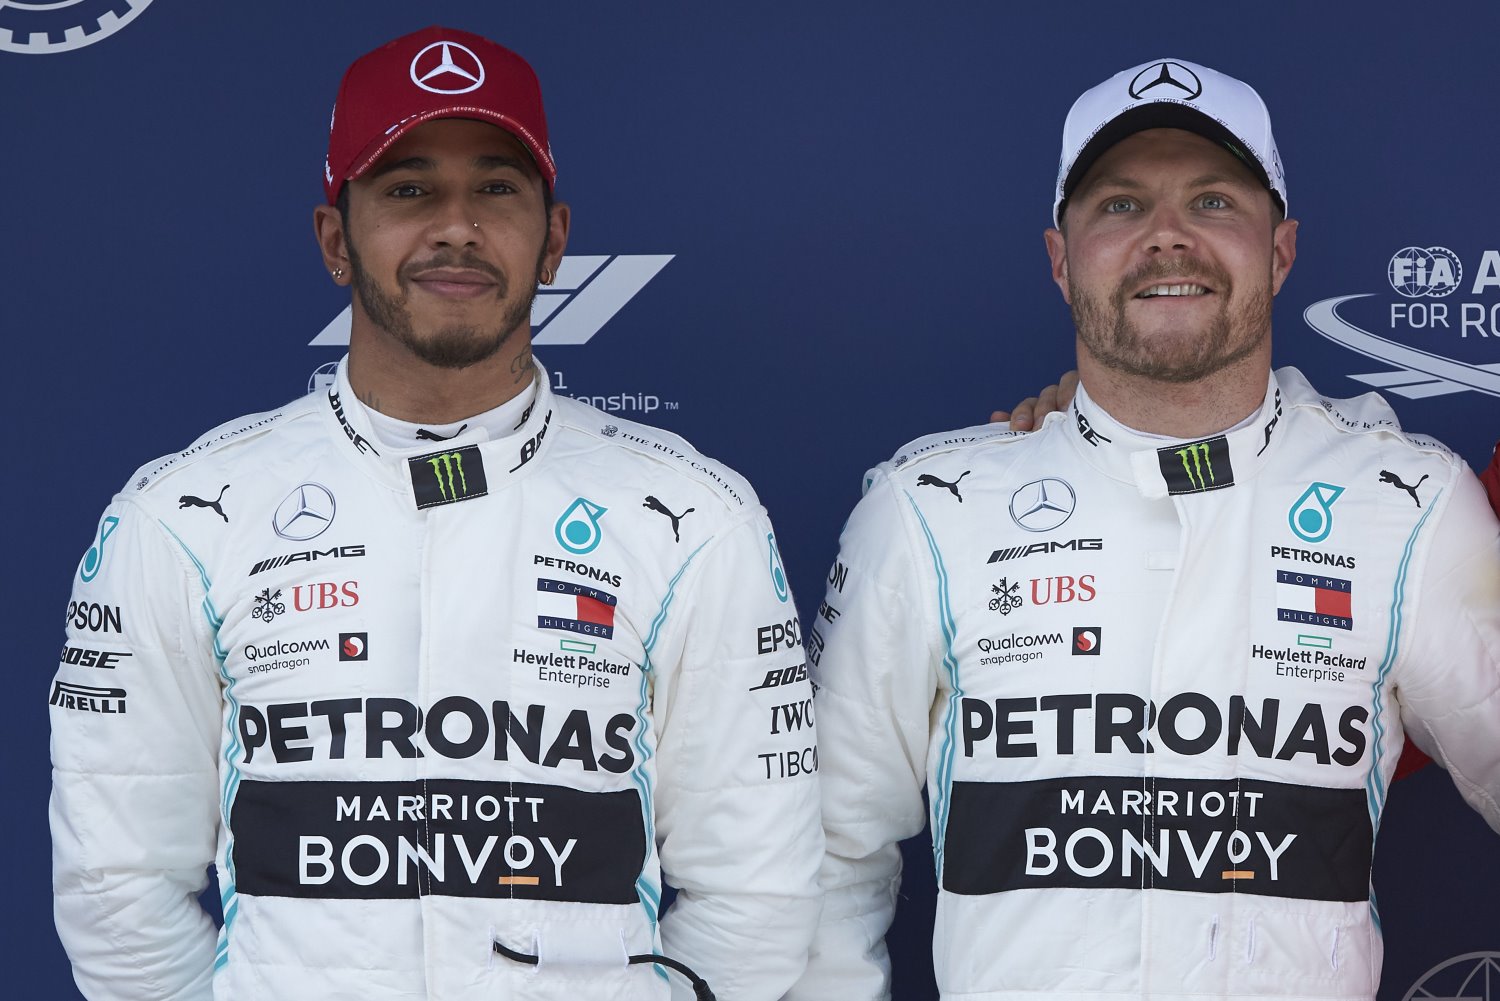 Another easy 1-2 for the Aldo Costa designed Mercedes driven by Hamilton and Bottas